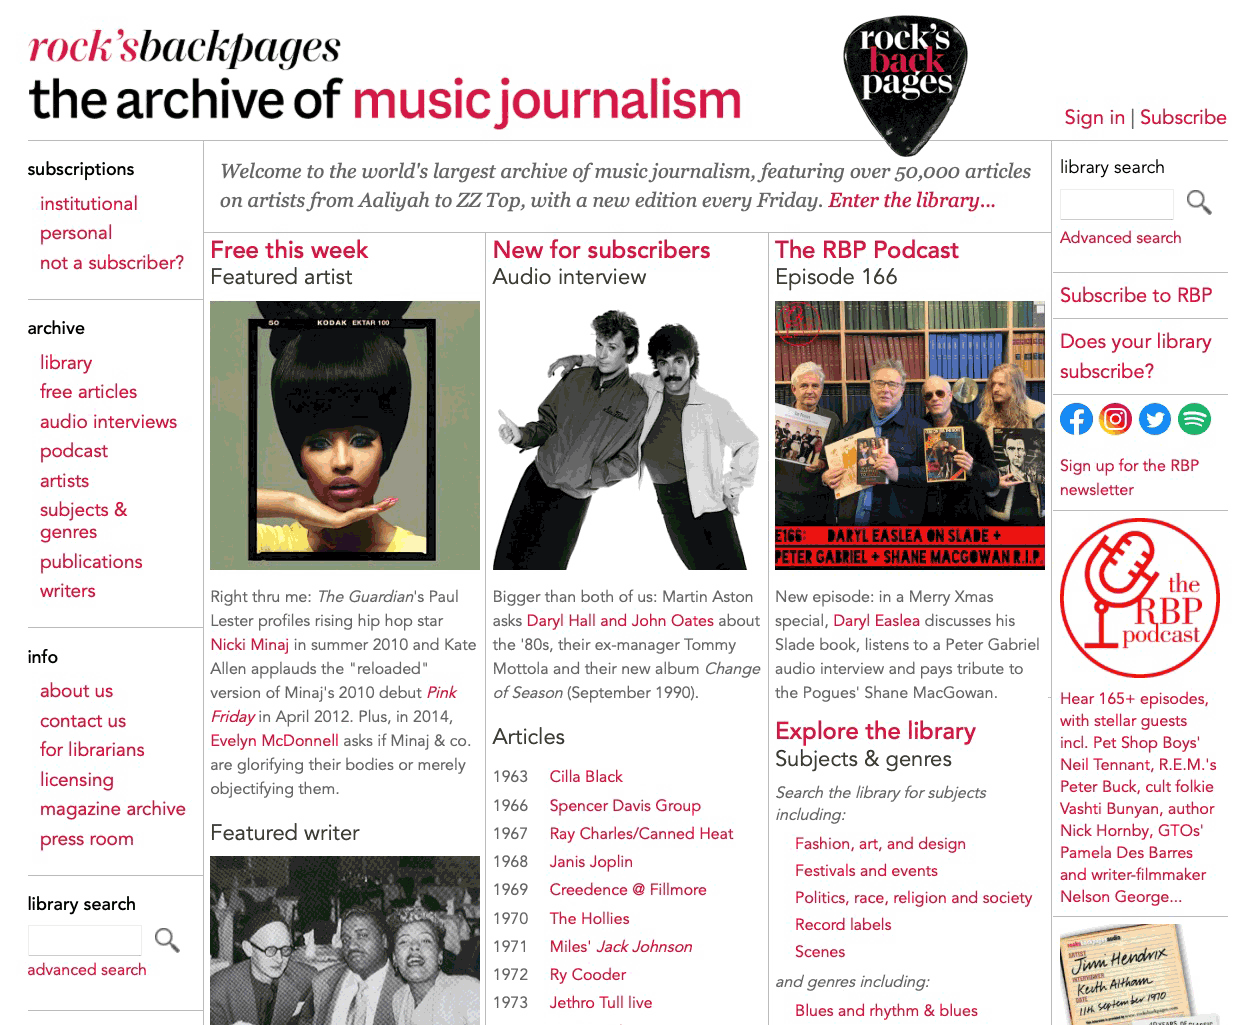 An introduction to the online library of music journalism